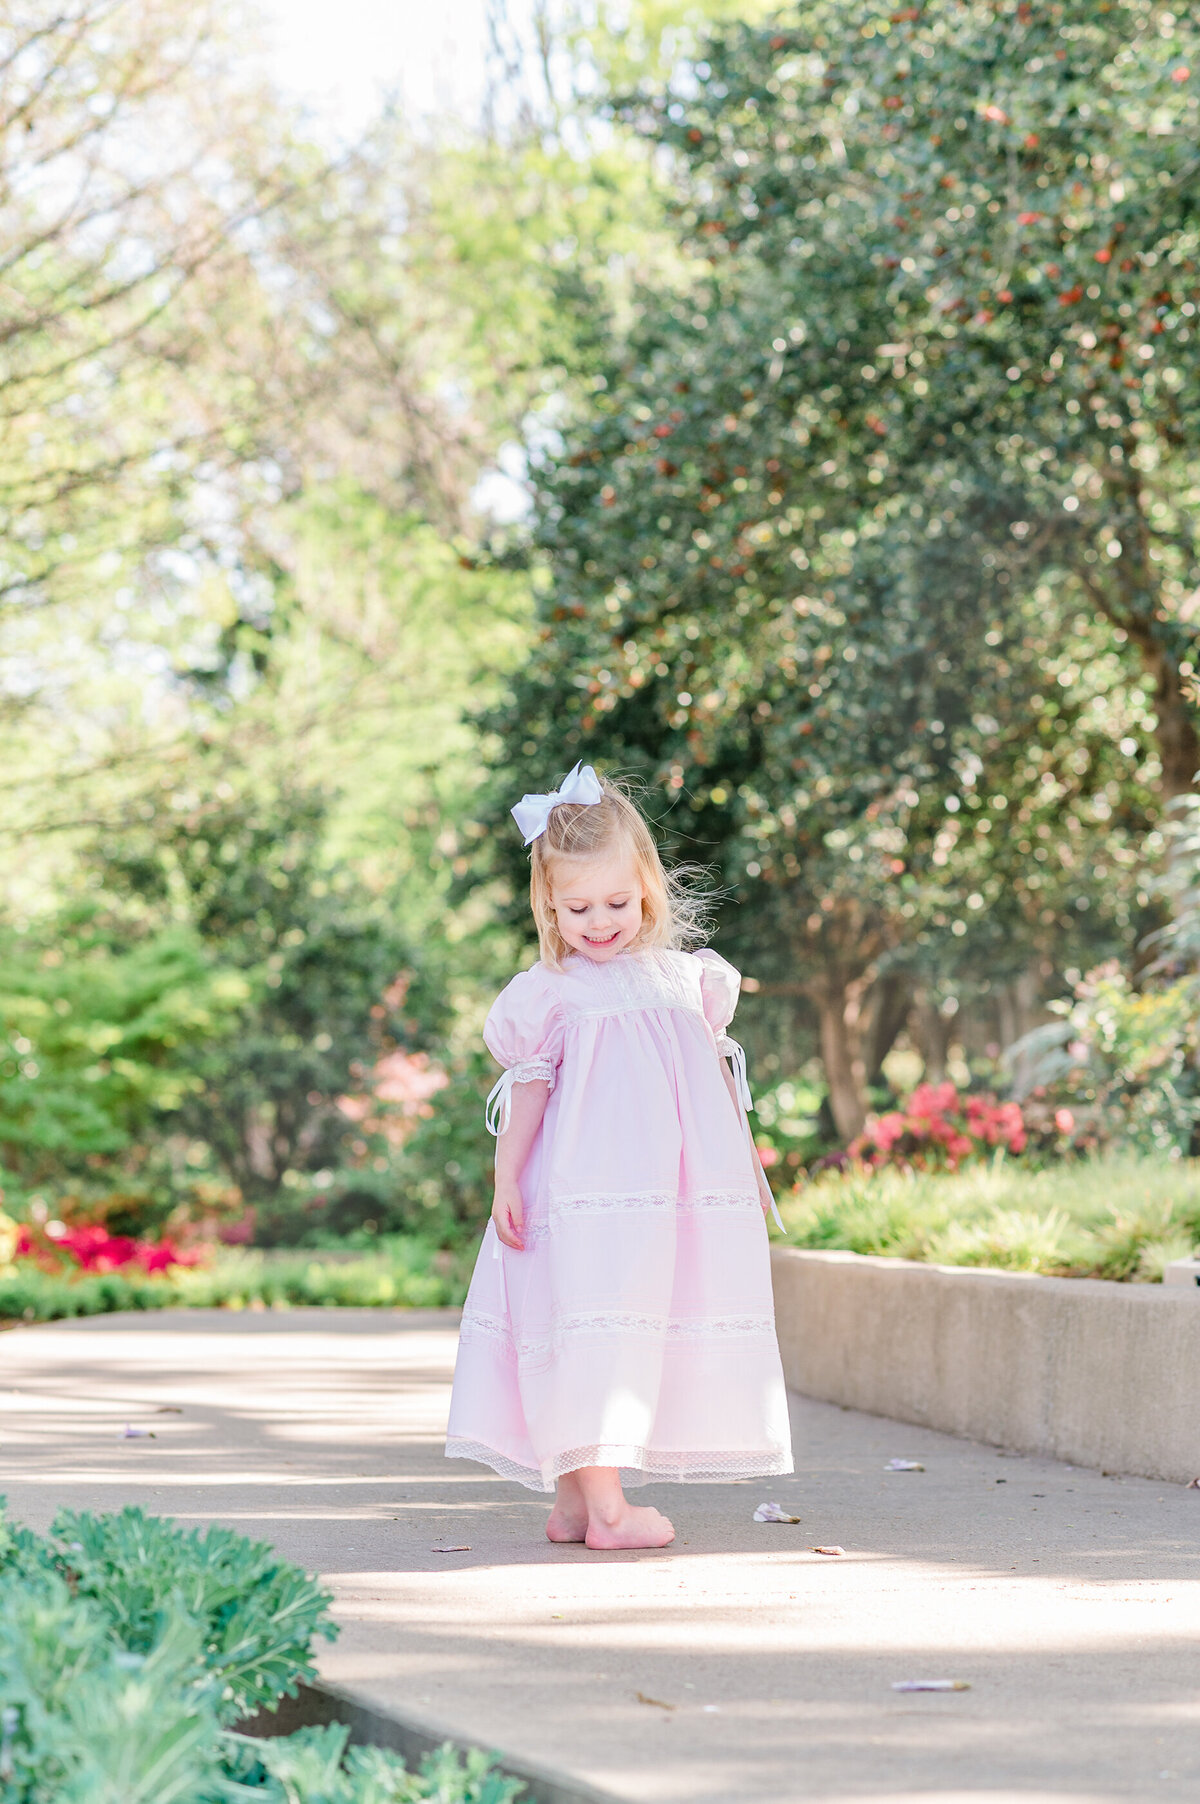 Young girl wearing a pink heirloom dress and large white bow walking down a manicured bath at a botanical garden.